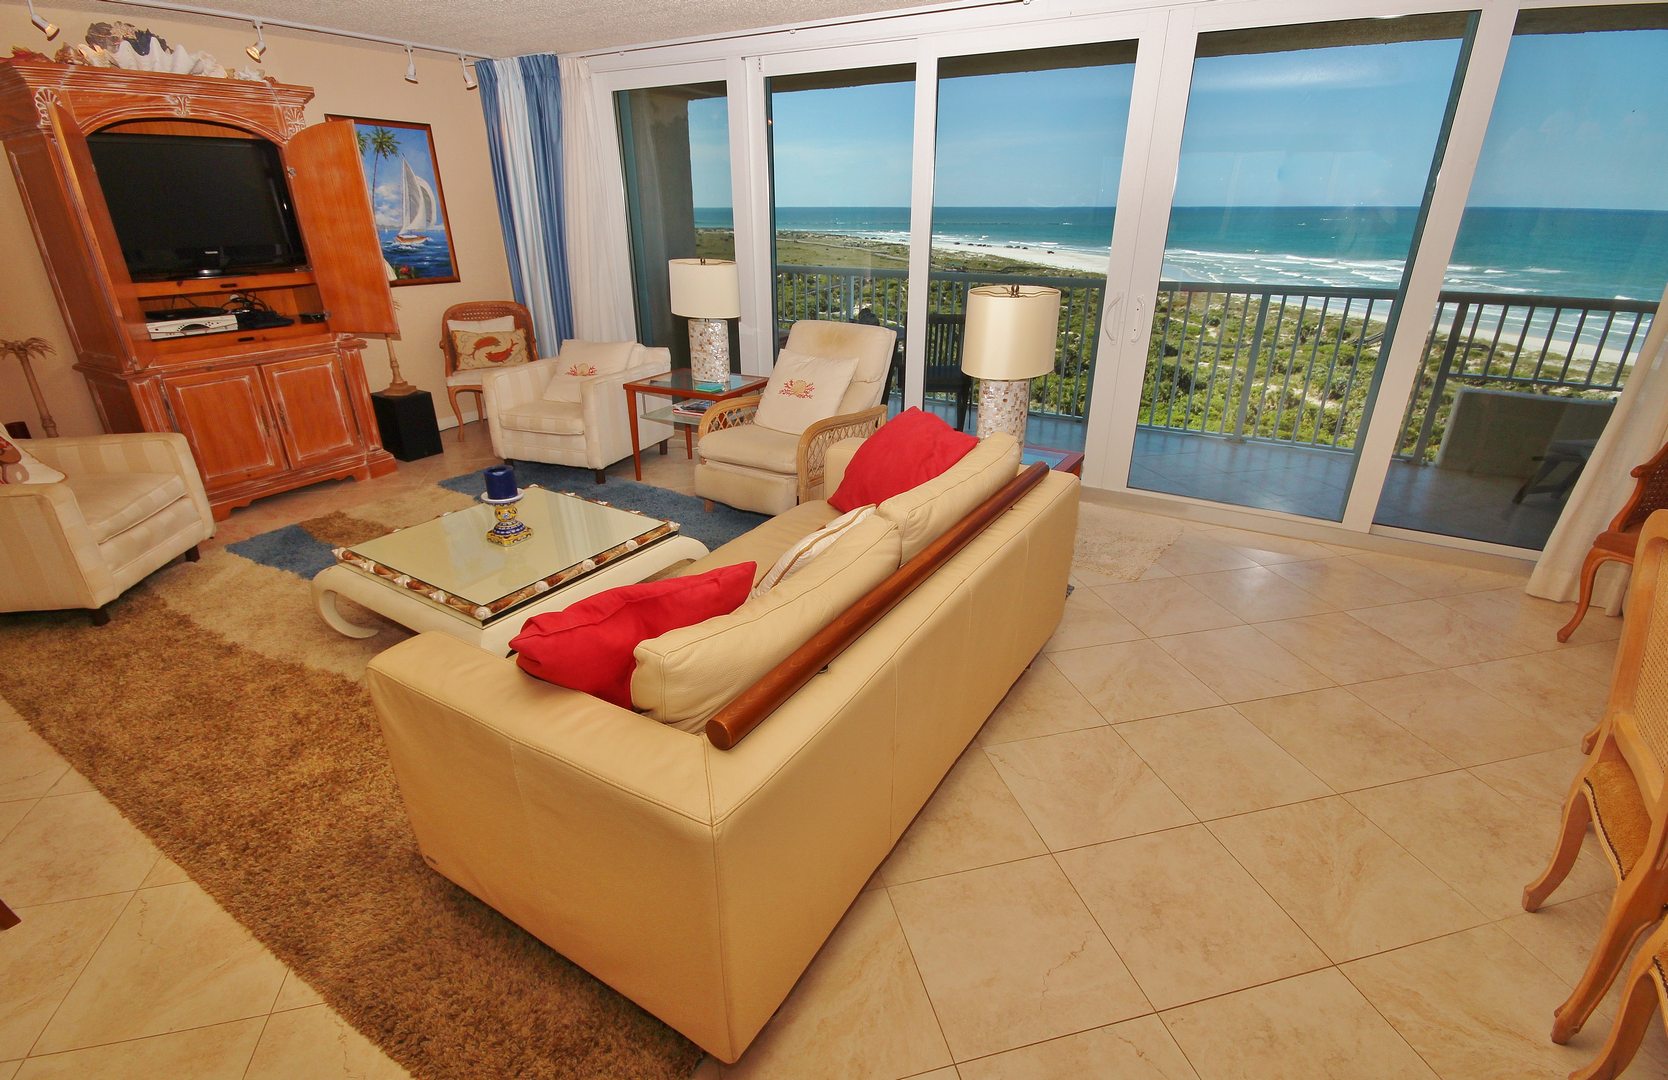 The beach is visible from the living room